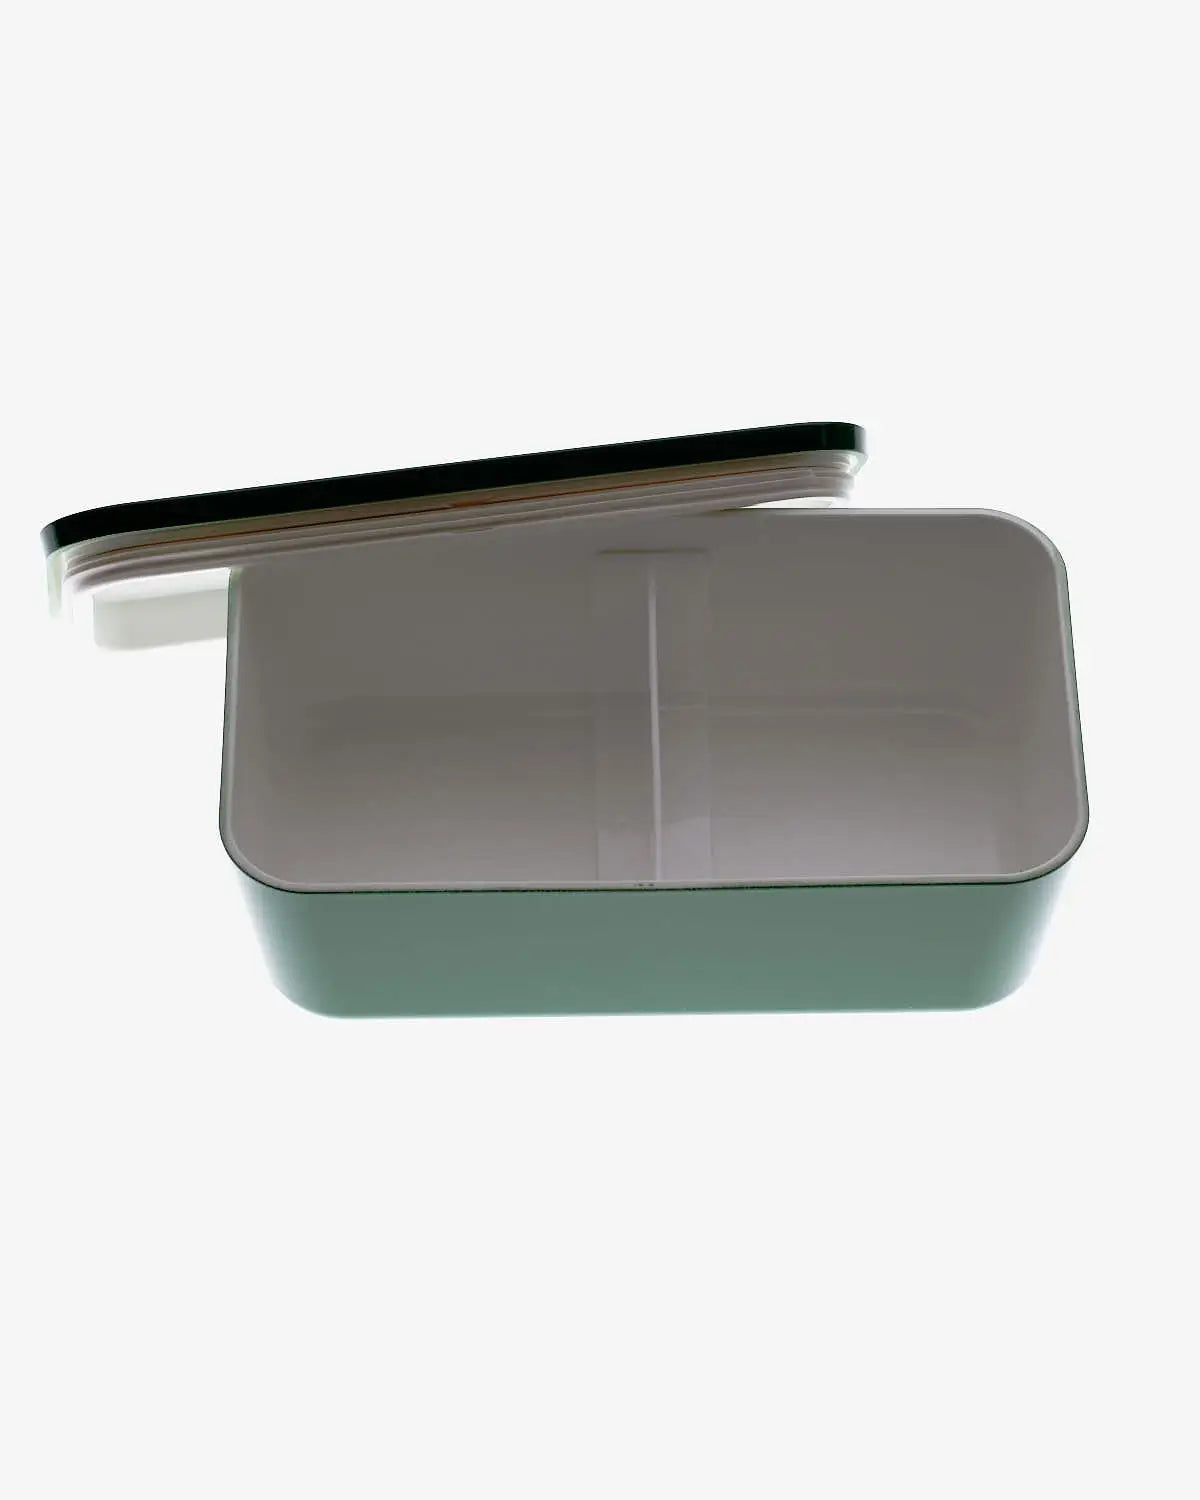 Bento Box Flat in Forest Green